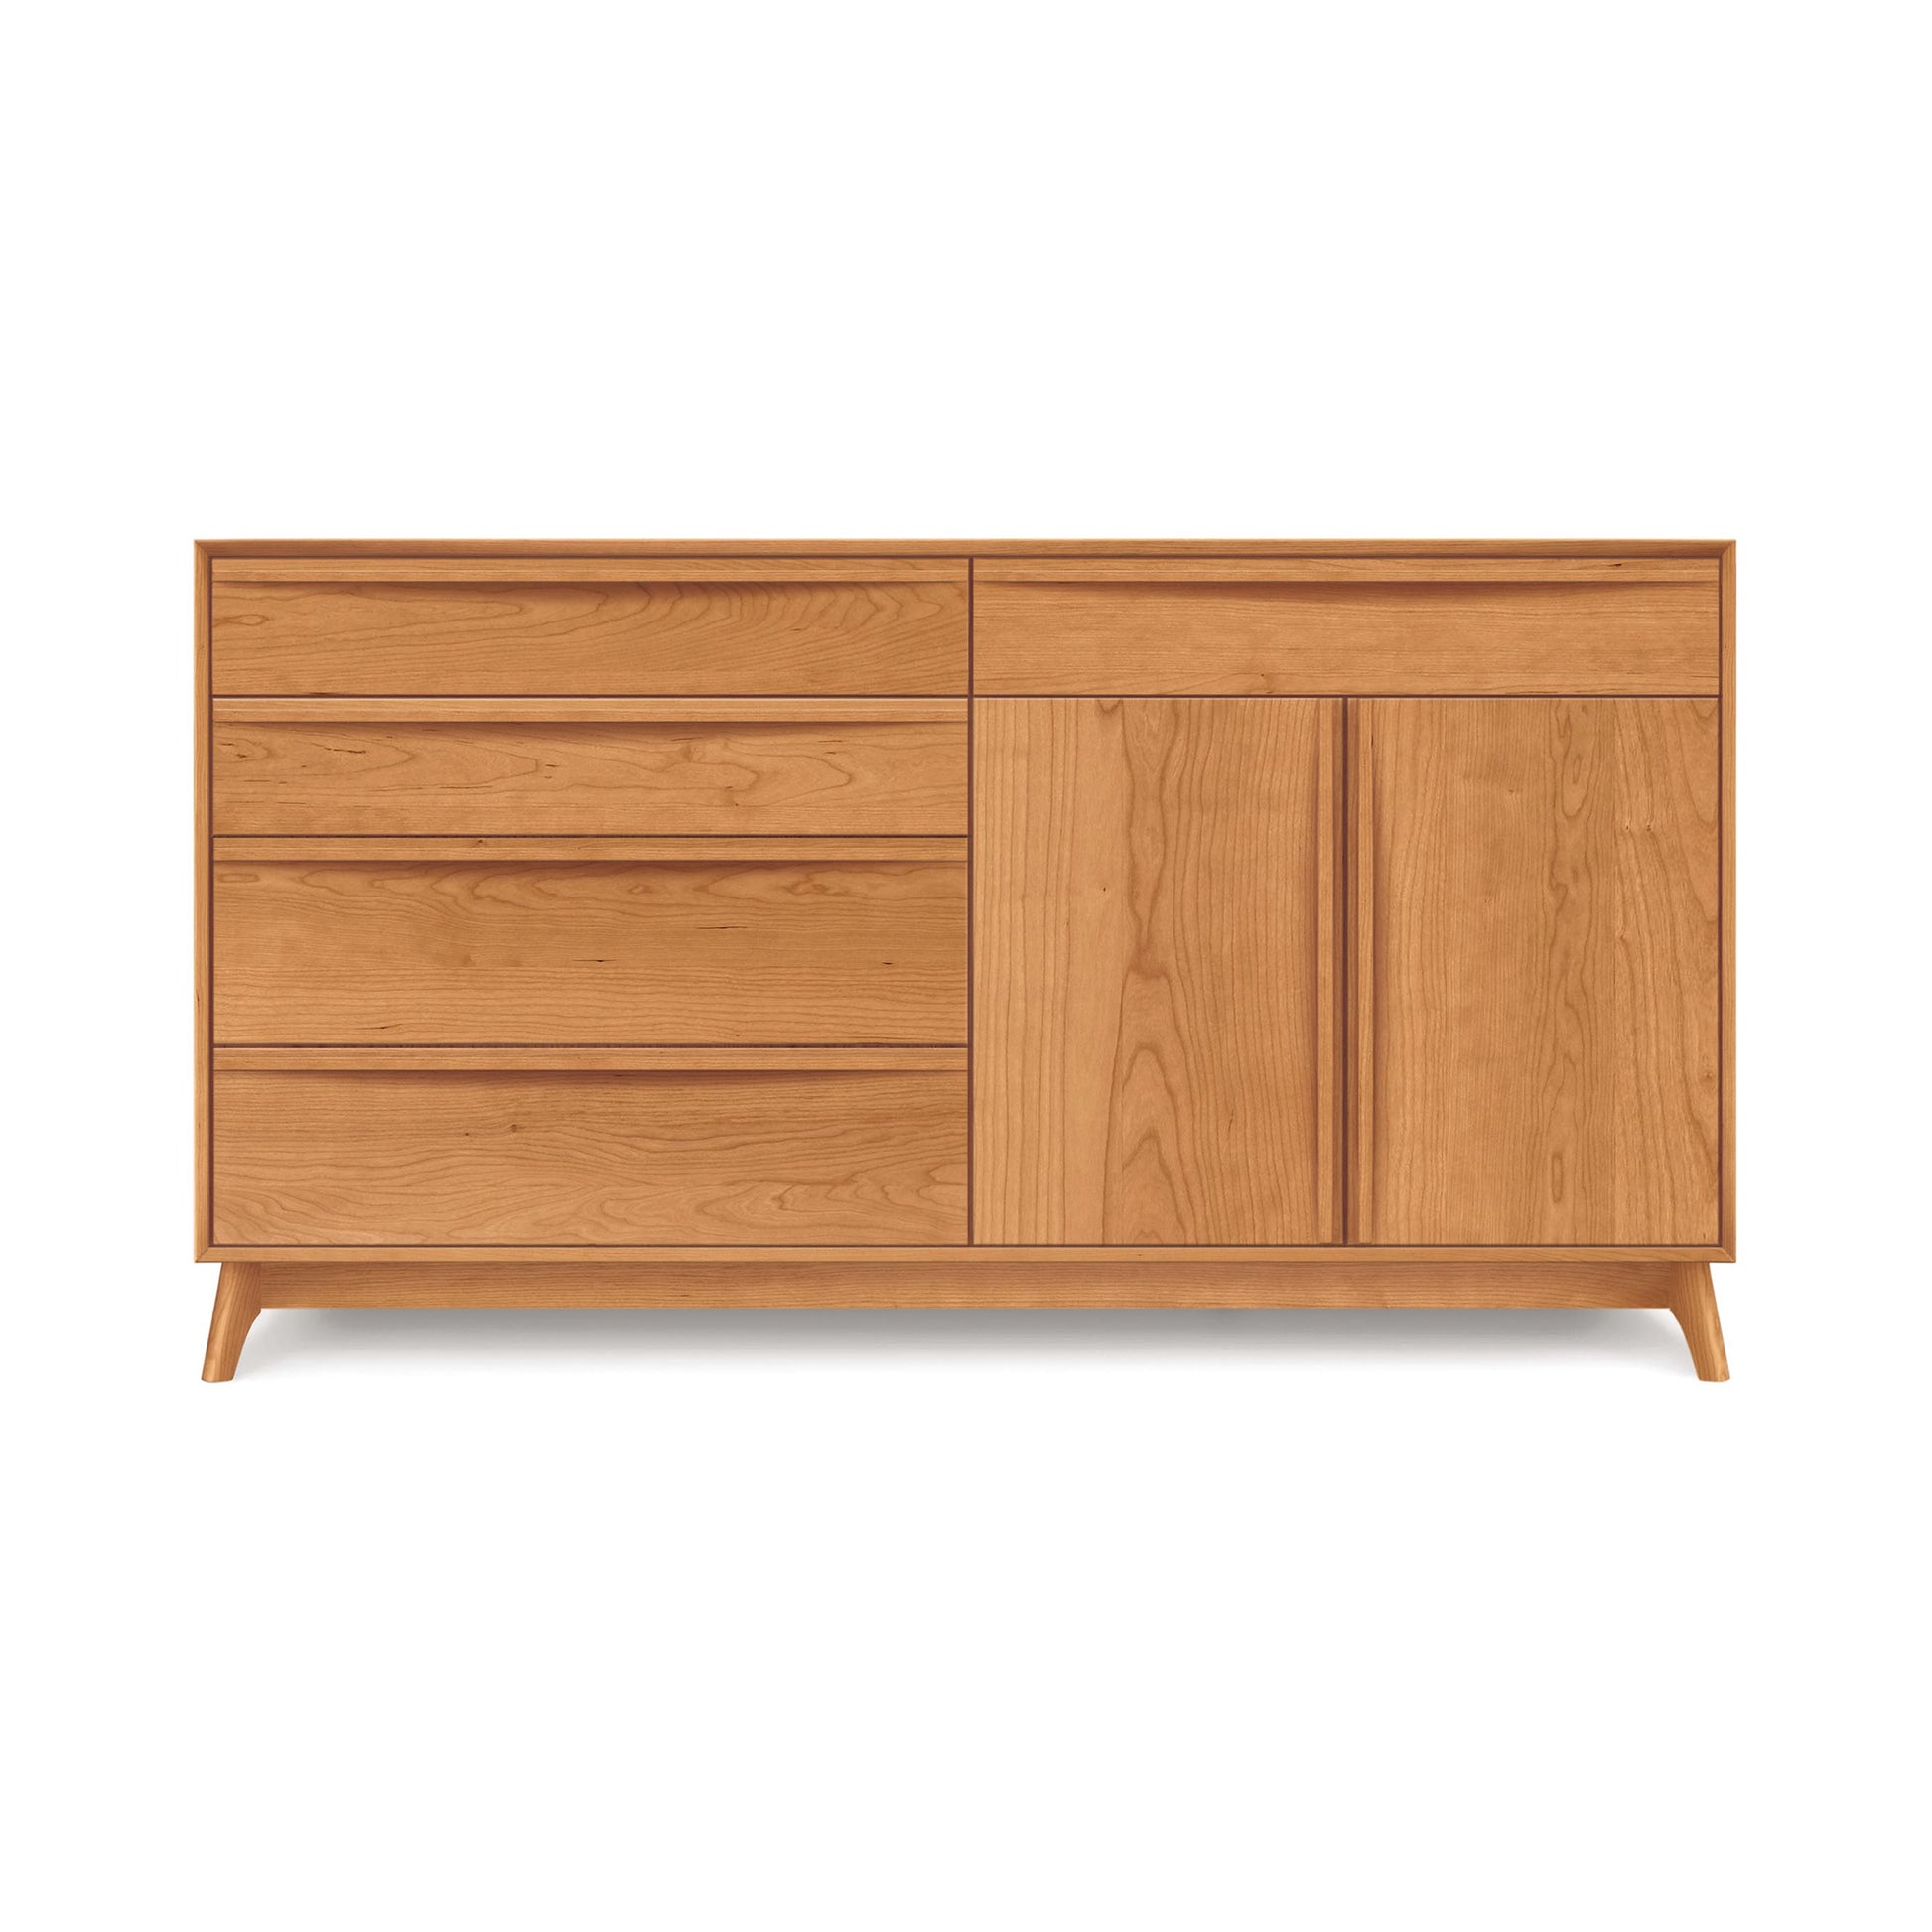 A Copeland Furniture Catalina 5-Drawer, 2-Door Buffet, a wooden sideboard with sliding doors and drawers on short angled legs against a white background, perfect for mid-century modern dining.